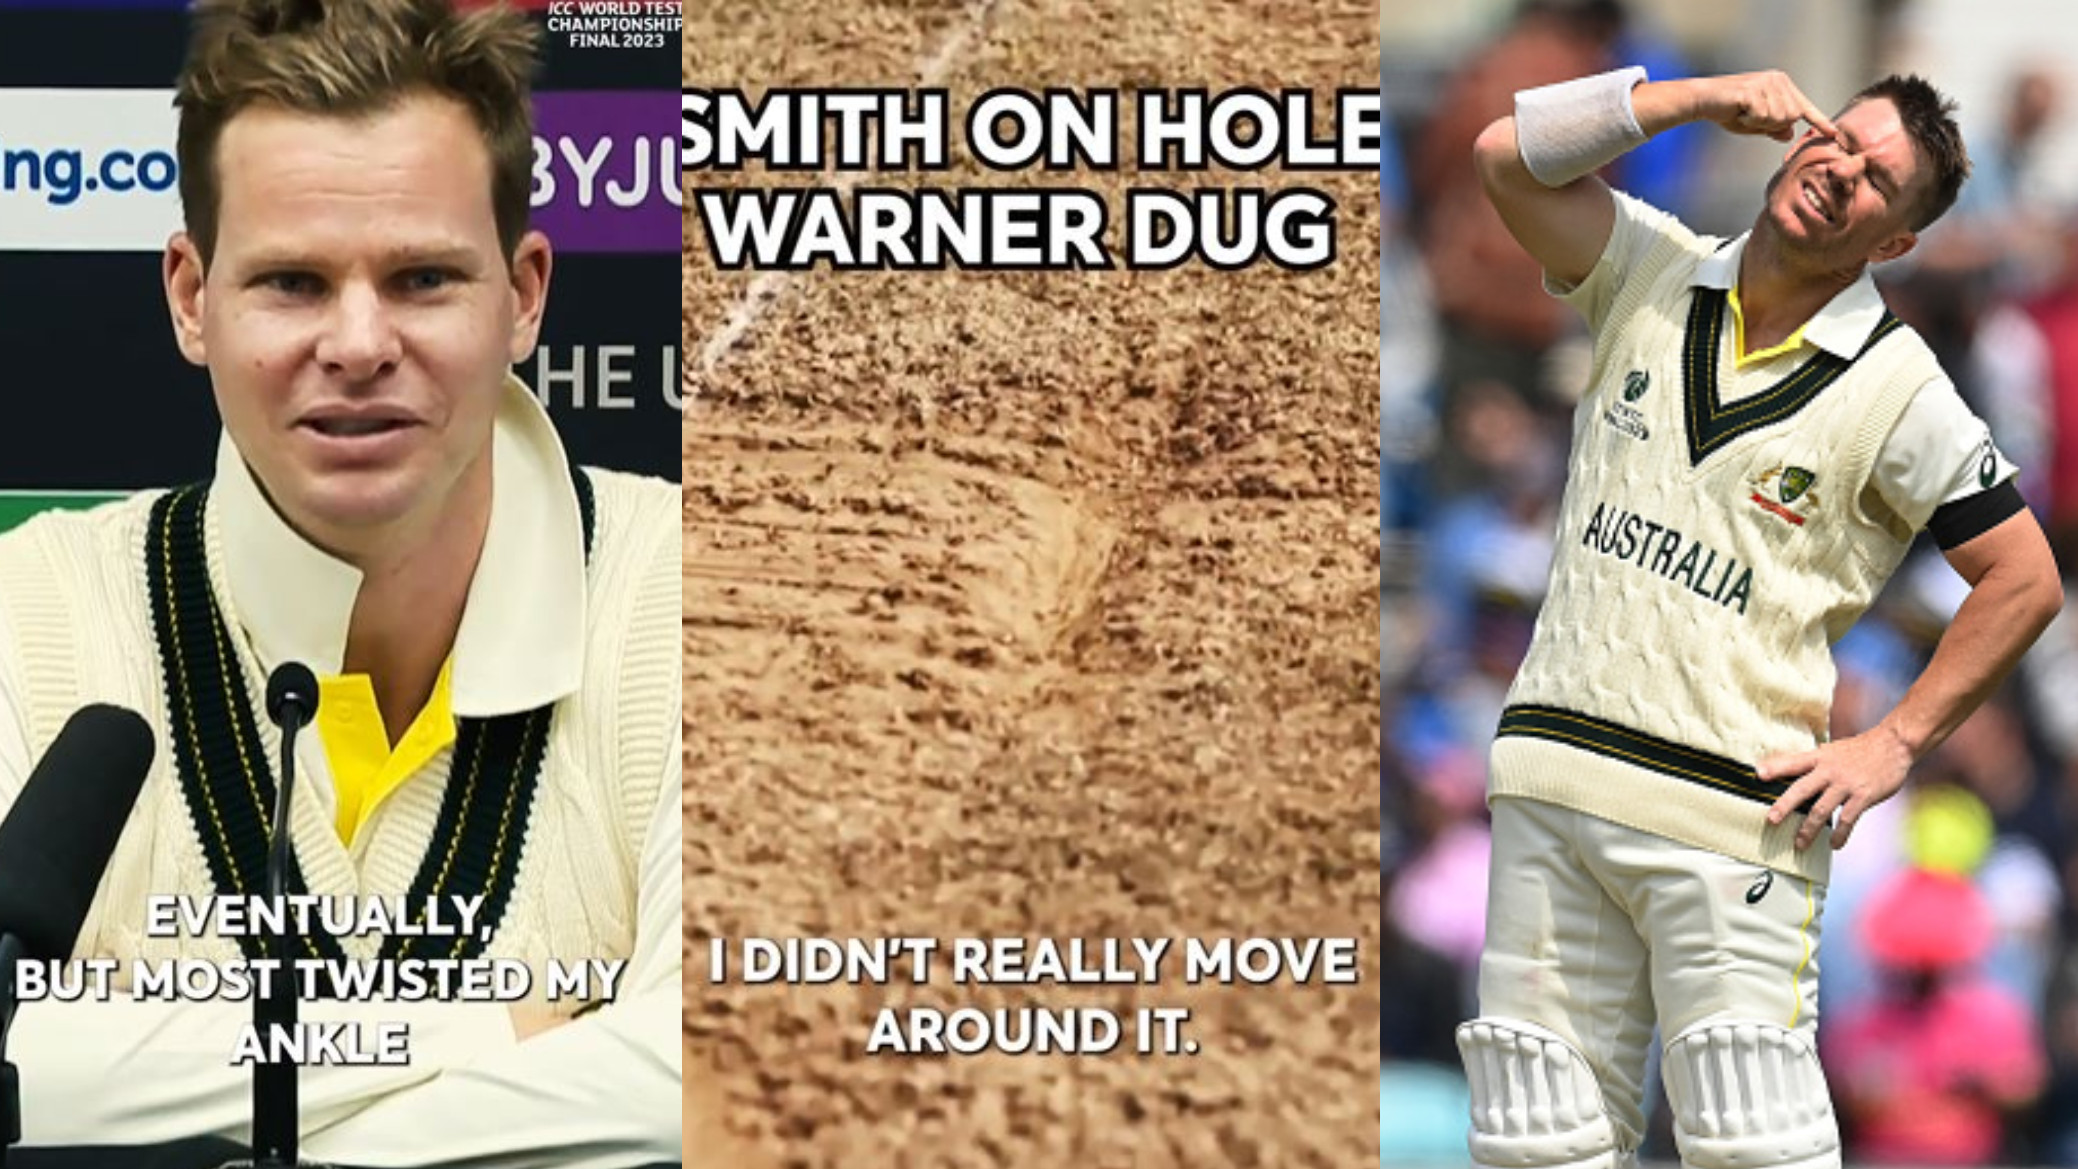 WTC 2023 Final: WATCH- “Almost twisted by ankle”- Steve Smith’s funny take on Warner digging a hole near the crease